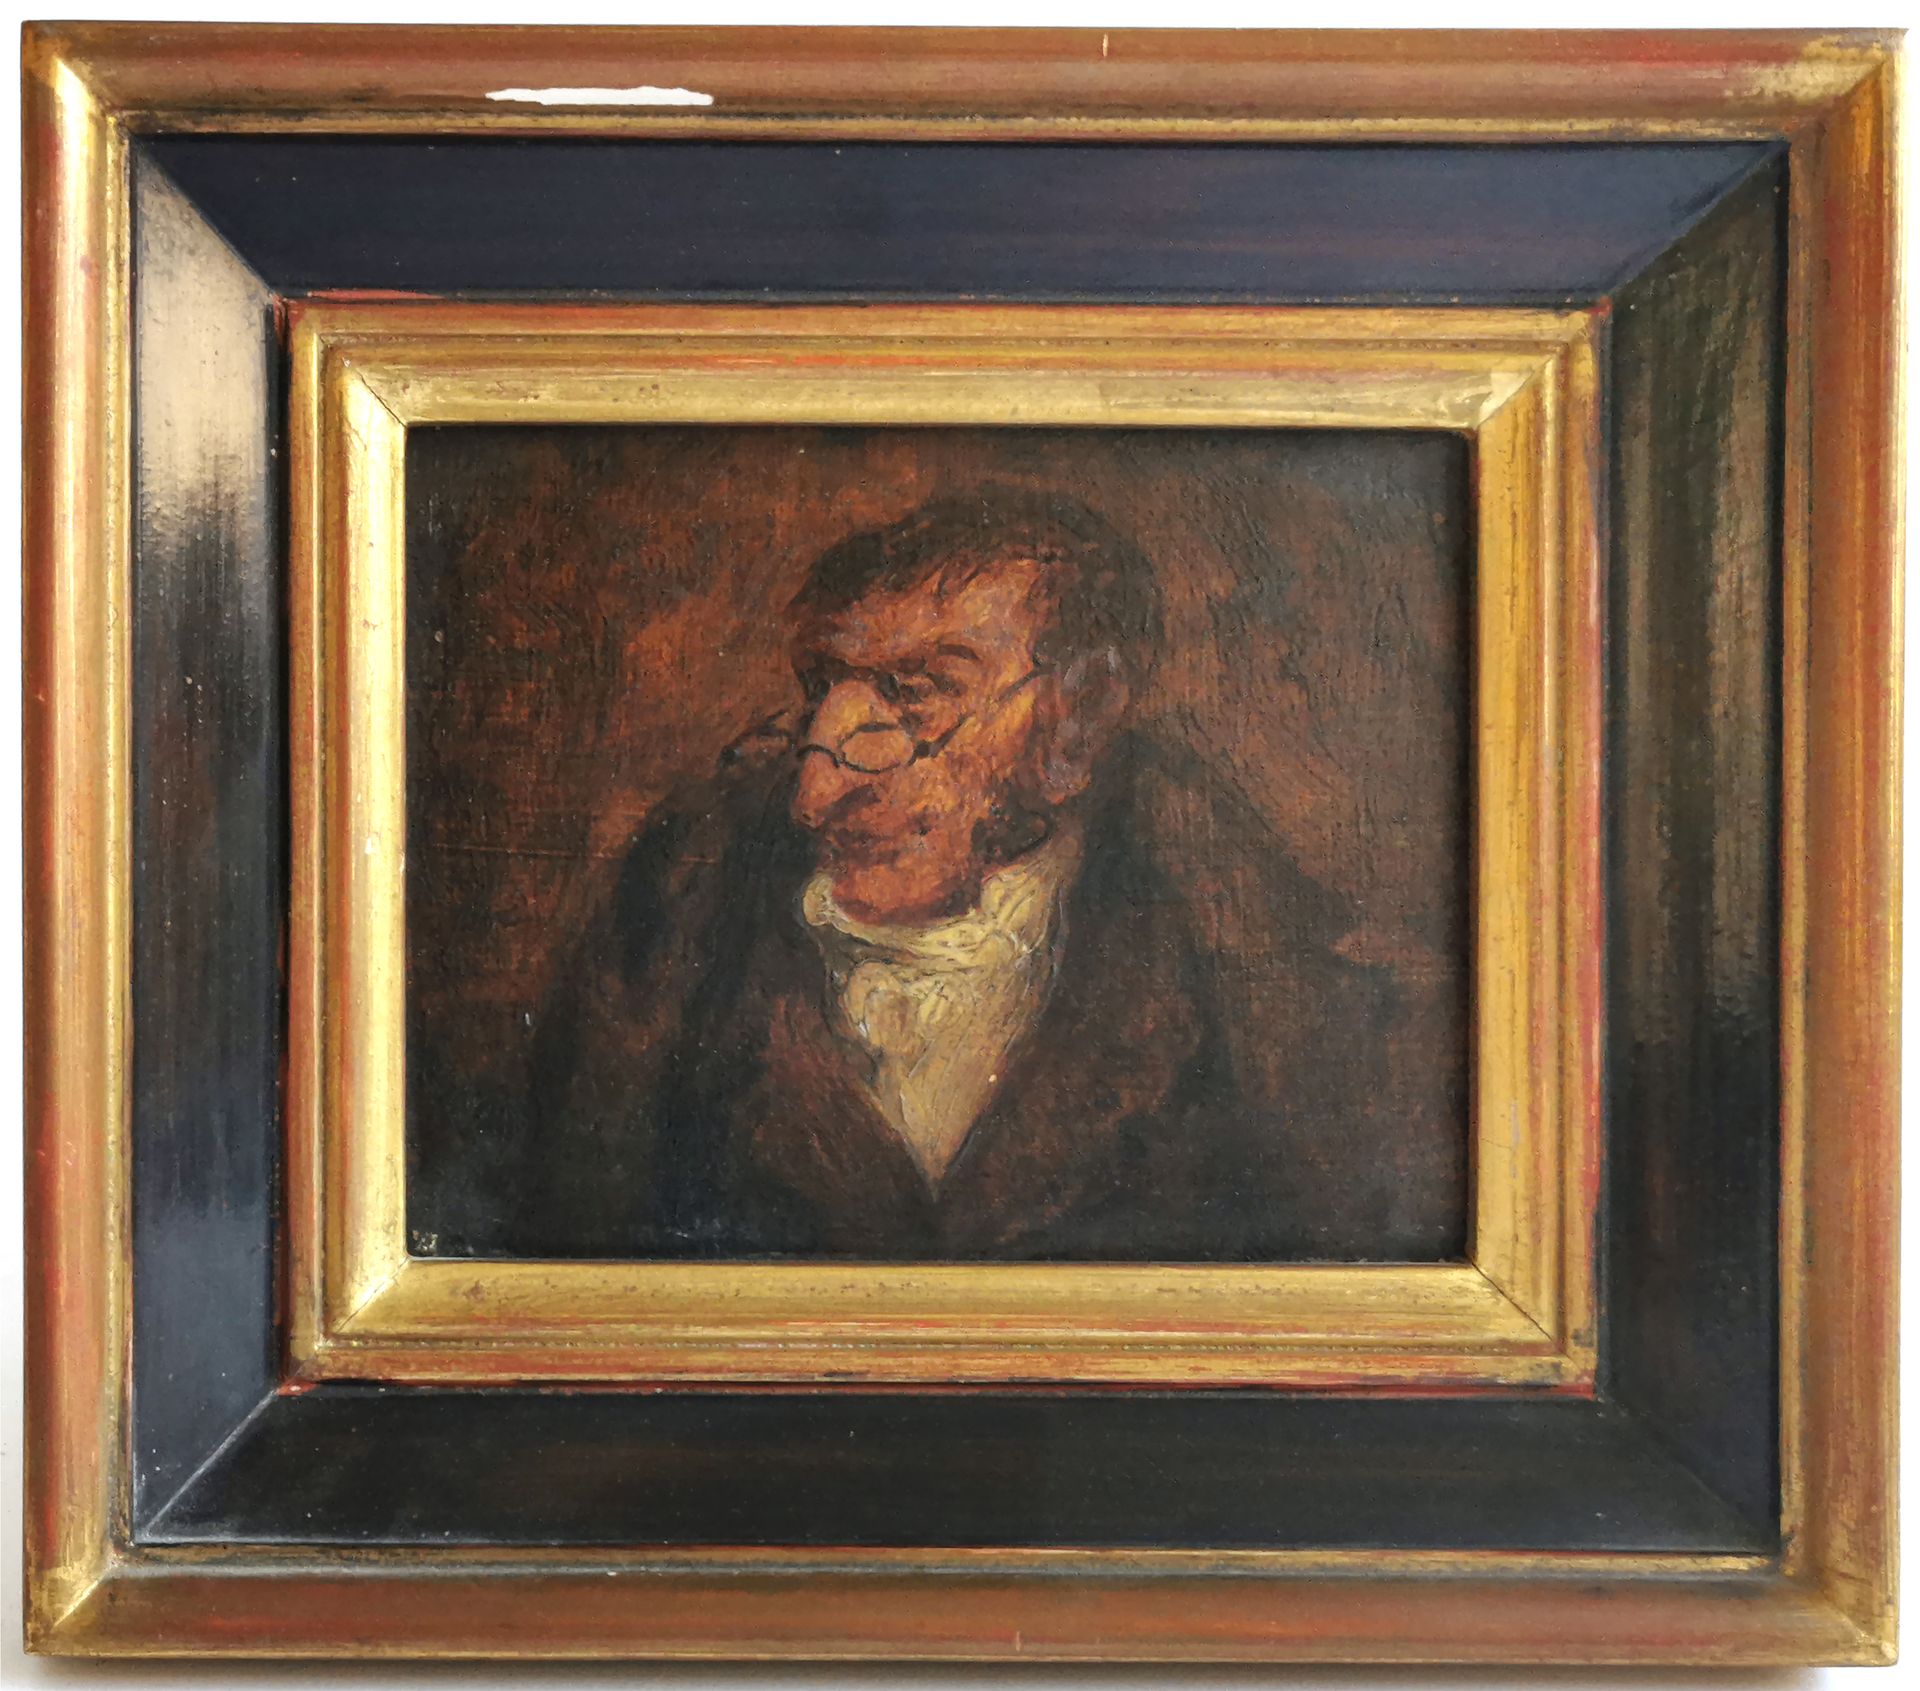 Null After Honoré DAUMIER (1808-1879)

Portrait of a man with glasses

Oil on pa&hellip;